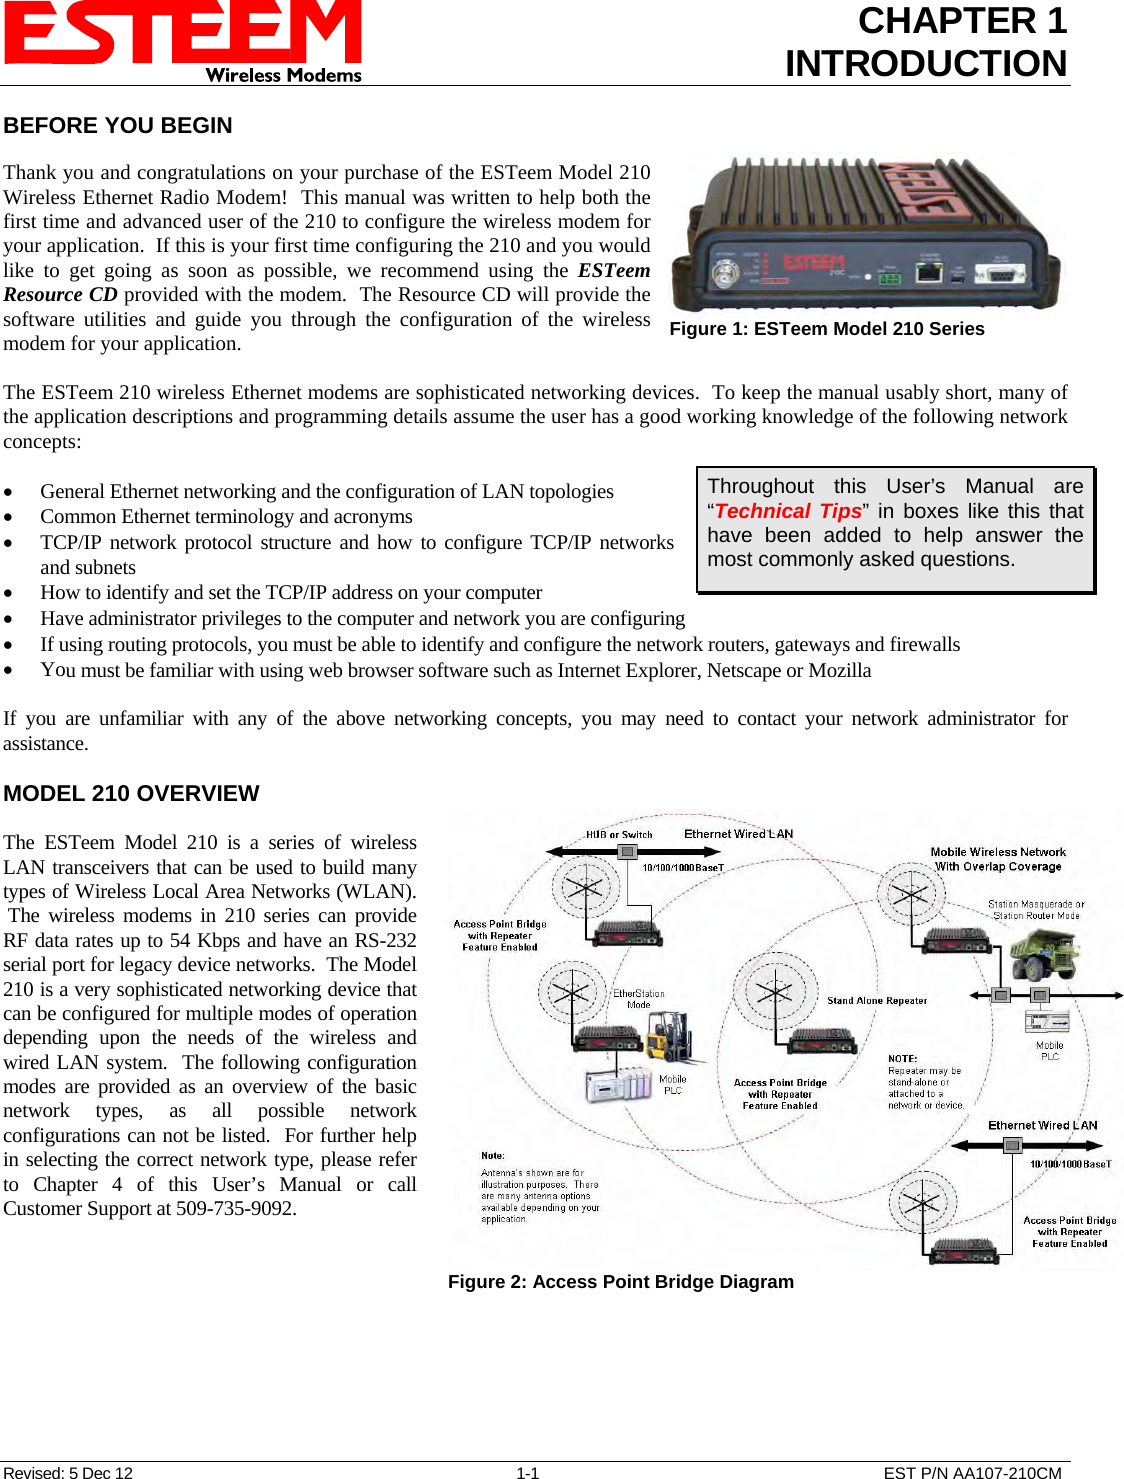 CHAPTER 1 INTRODUCTION  BEFORE YOU BEGIN   Thank you and congratulations on your purchase of the ESTeem Model 210 Wireless Ethernet Radio Modem!  This manual was written to help both the first time and advanced user of the 210 to configure the wireless modem for your application.  If this is your first time configuring the 210 and you would like to get going as soon as possible, we recommend using the ESTeem Resource CD provided with the modem.  The Resource CD will provide the software utilities and guide you through the configuration of the wireless modem for your application.  Figure 1: ESTeem Model 210 Series   The ESTeem 210 wireless Ethernet modems are sophisticated networking devices.  To keep the manual usably short, many of the application descriptions and programming details assume the user has a good working knowledge of the following network concepts:  Throughout this User’s Manual are “Technical Tips” in boxes like this that have been added to help answer the most commonly asked questions. • General Ethernet networking and the configuration of LAN topologies  • Common Ethernet terminology and acronyms • TCP/IP network protocol structure and how to configure TCP/IP networks and subnets • How to identify and set the TCP/IP address on your computer • Have administrator privileges to the computer and network you are configuring • If using routing protocols, you must be able to identify and configure the network routers, gateways and firewalls • You must be familiar with using web browser software such as Internet Explorer, Netscape or Mozilla  If you are unfamiliar with any of the above networking concepts, you may need to contact your network administrator for assistance.  MODEL 210 OVERVIEW  The ESTeem Model 210 is a series of wireless LAN transceivers that can be used to build many types of Wireless Local Area Networks (WLAN).  The wireless modems in 210 series can provide RF data rates up to 54 Kbps and have an RS-232 serial port for legacy device networks.  The Model 210 is a very sophisticated networking device that can be configured for multiple modes of operation depending upon the needs of the wireless and wired LAN system.  The following configuration modes are provided as an overview of the basic network types, as all possible network configurations can not be listed.  For further help in selecting the correct network type, please refer to Chapter 4 of this User’s Manual or call Customer Support at 509-735-9092.   Figure 2: Access Point Bridge Diagram  Revised: 5 Dec 12  1-1  EST P/N AA107-210CM 